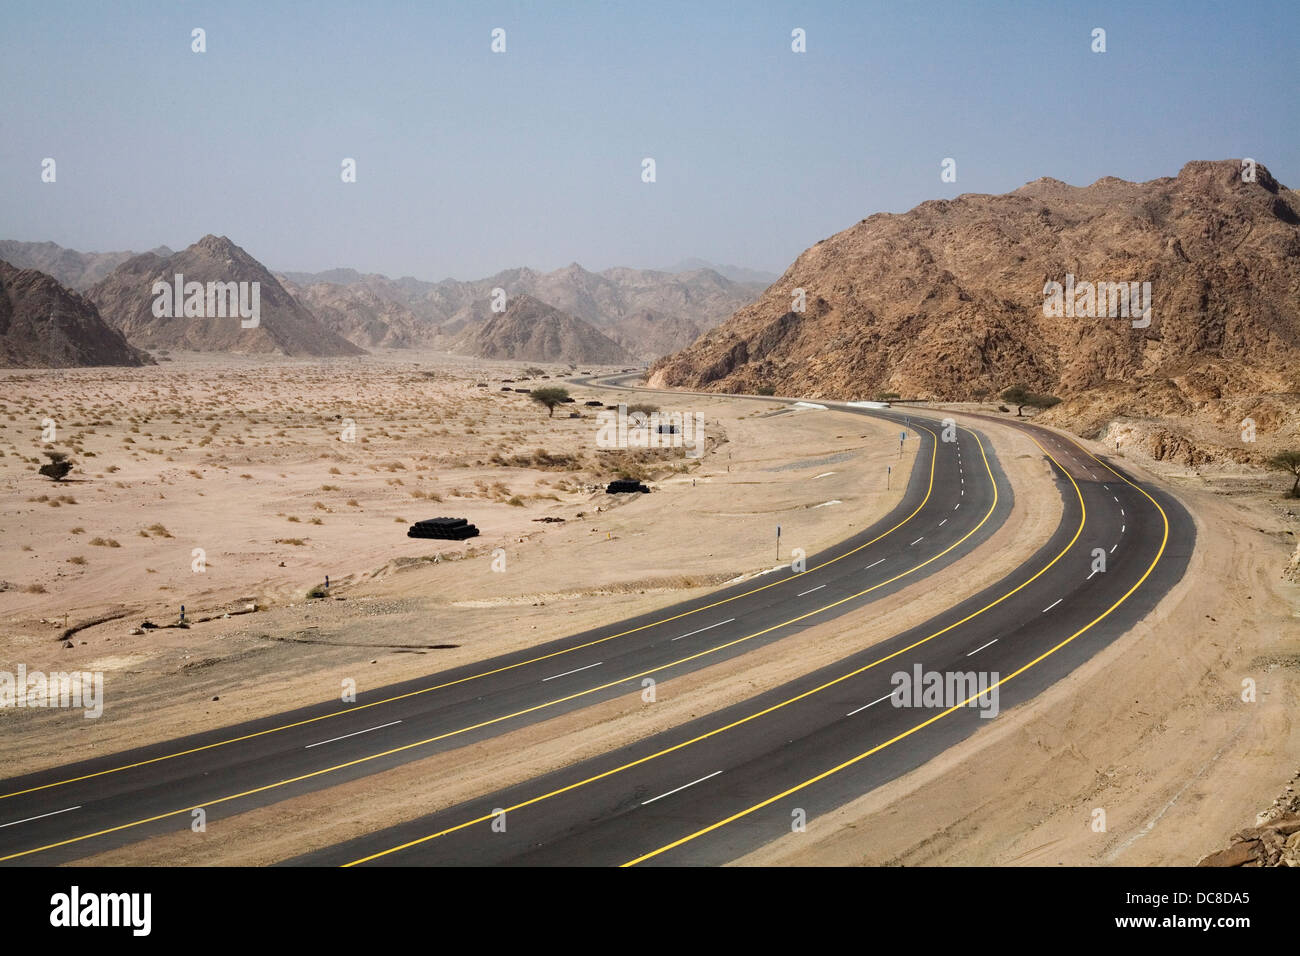 The Duba-Haql number 5 highway passing through the Sarawat Mountains in north west Saudi Arabia. Stock Photo